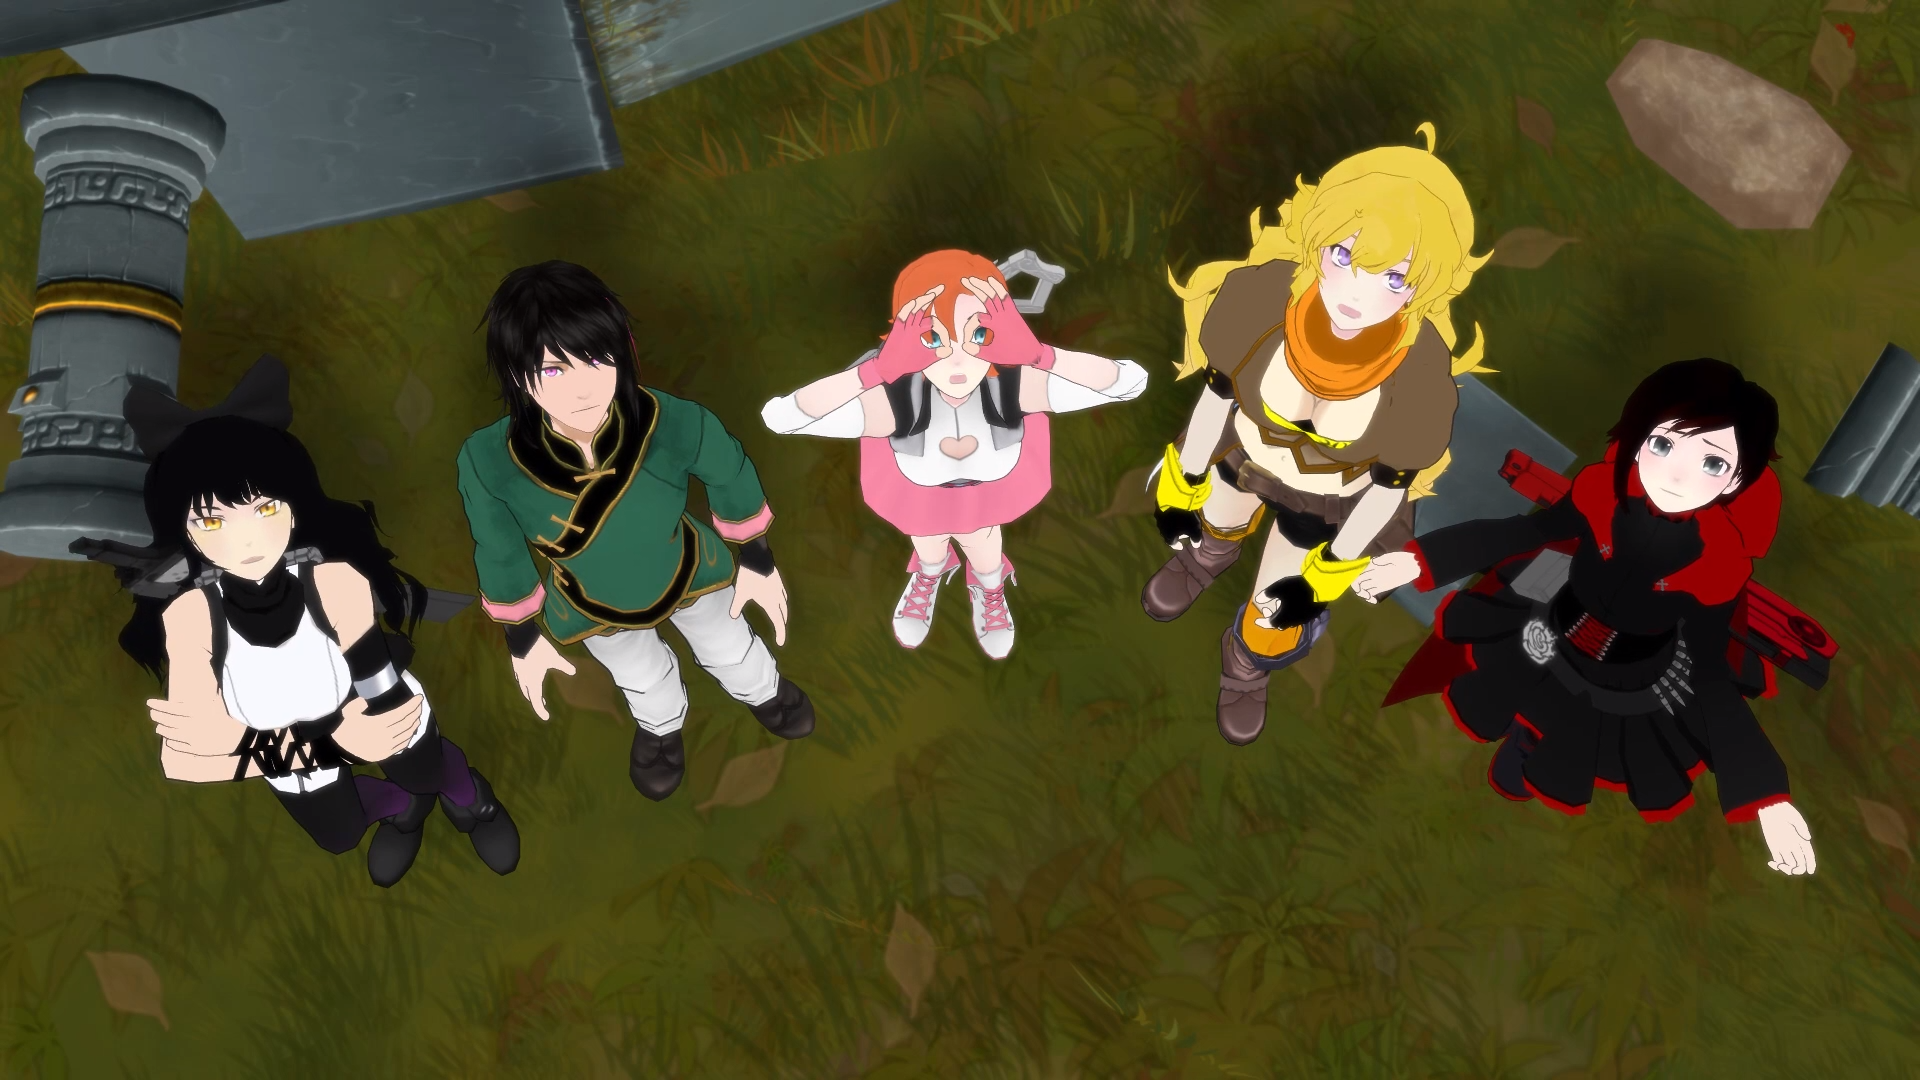 Five of the main characters in RWBY stare at the something in the sky. From left to right: Blake, Ren, Nora, Yang, and Ruby.